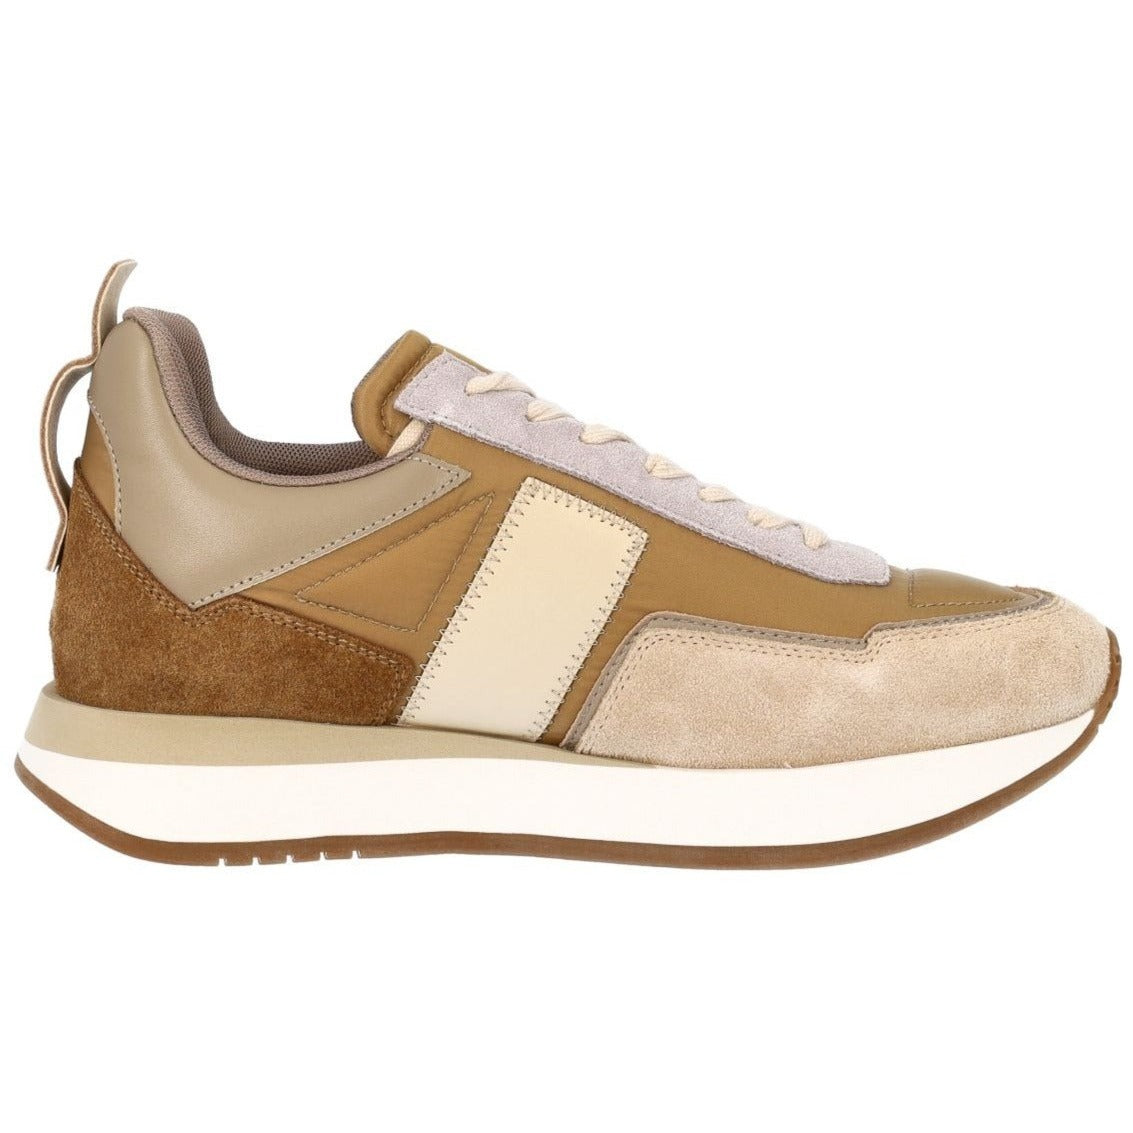 Sneakers Cesare Paciotti 4us man sand and camel leather